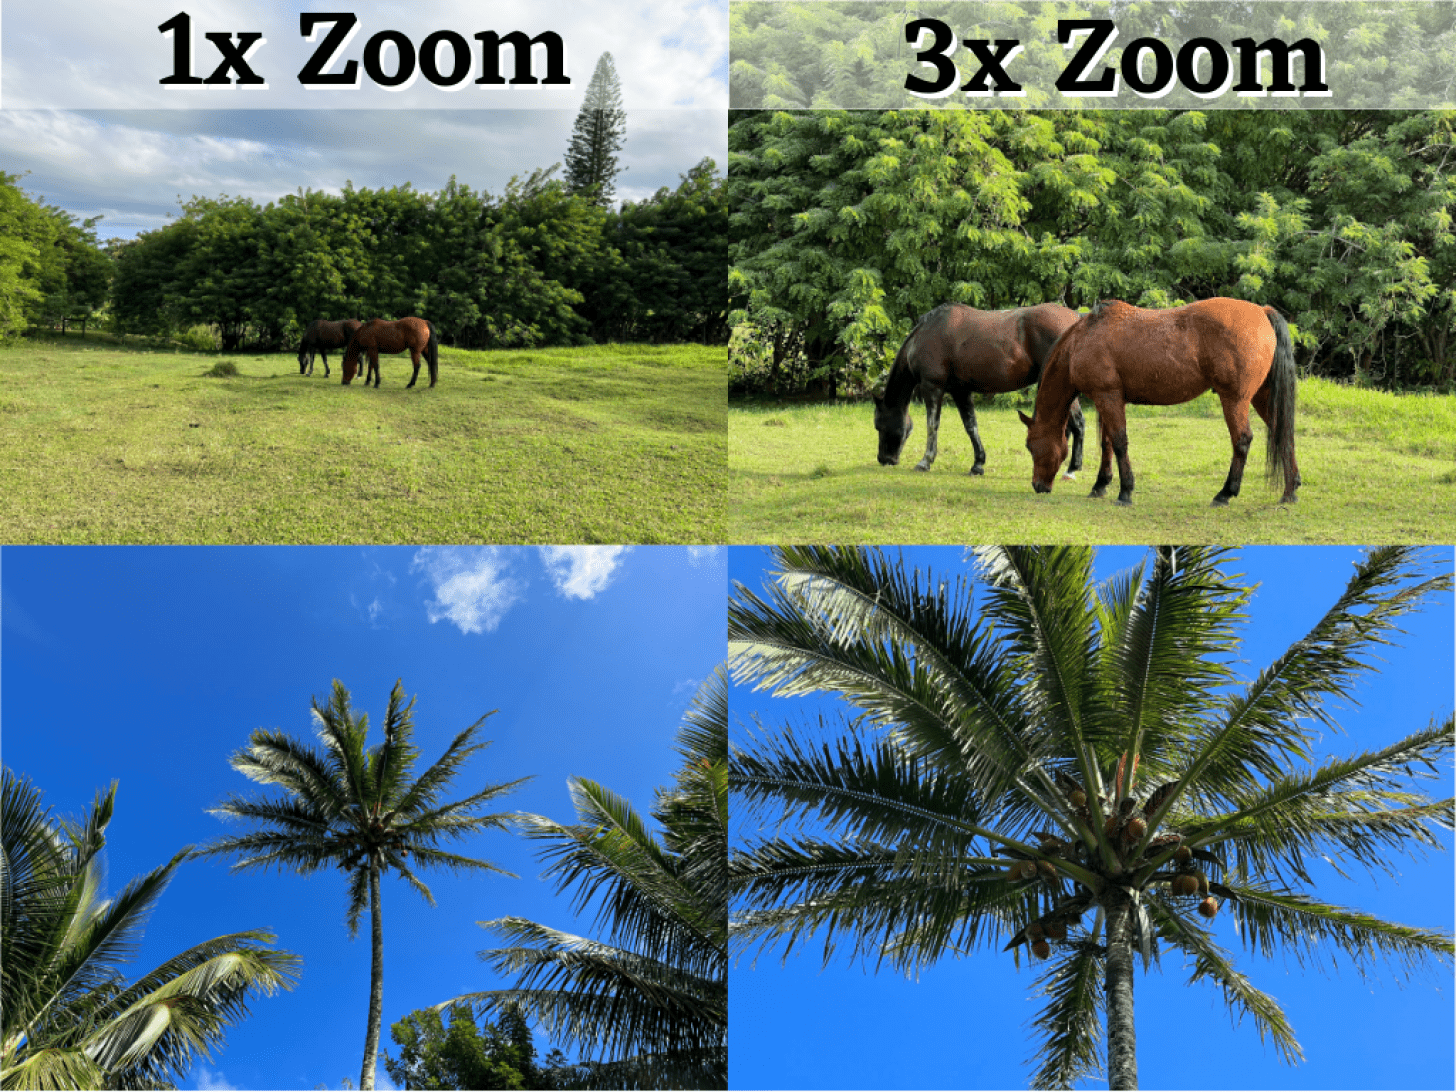 3x Zoom Means - digital camera magnification vs optical zoom